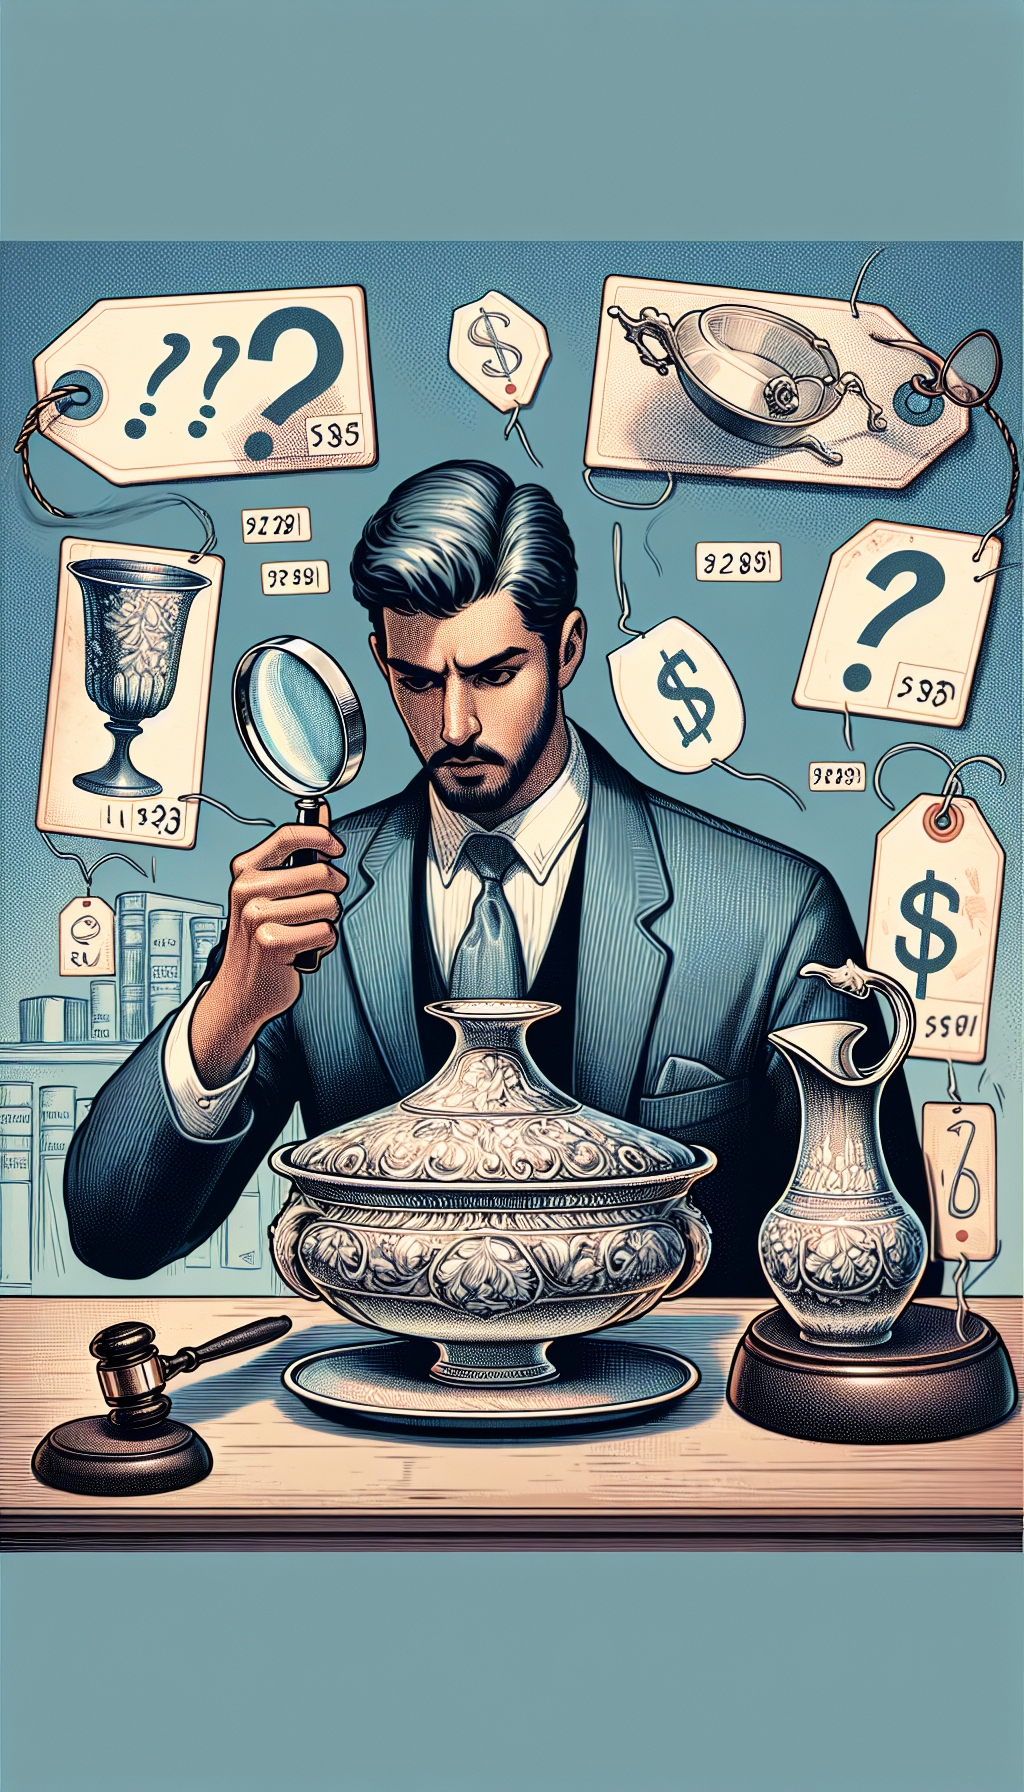 An illustration depicting an elegantly dressed antique appraiser holding a magnifying glass, peering closely at a beautifully detailed antique wash basin and pitcher set. Various translucent price tags float above the set, with question marks and vintage-inspired dollar sign sketches, symbolizing the evaluation process. The appraiser’s desk is strewn with reference books and auction gavels, hinting at the research involved in valuation.